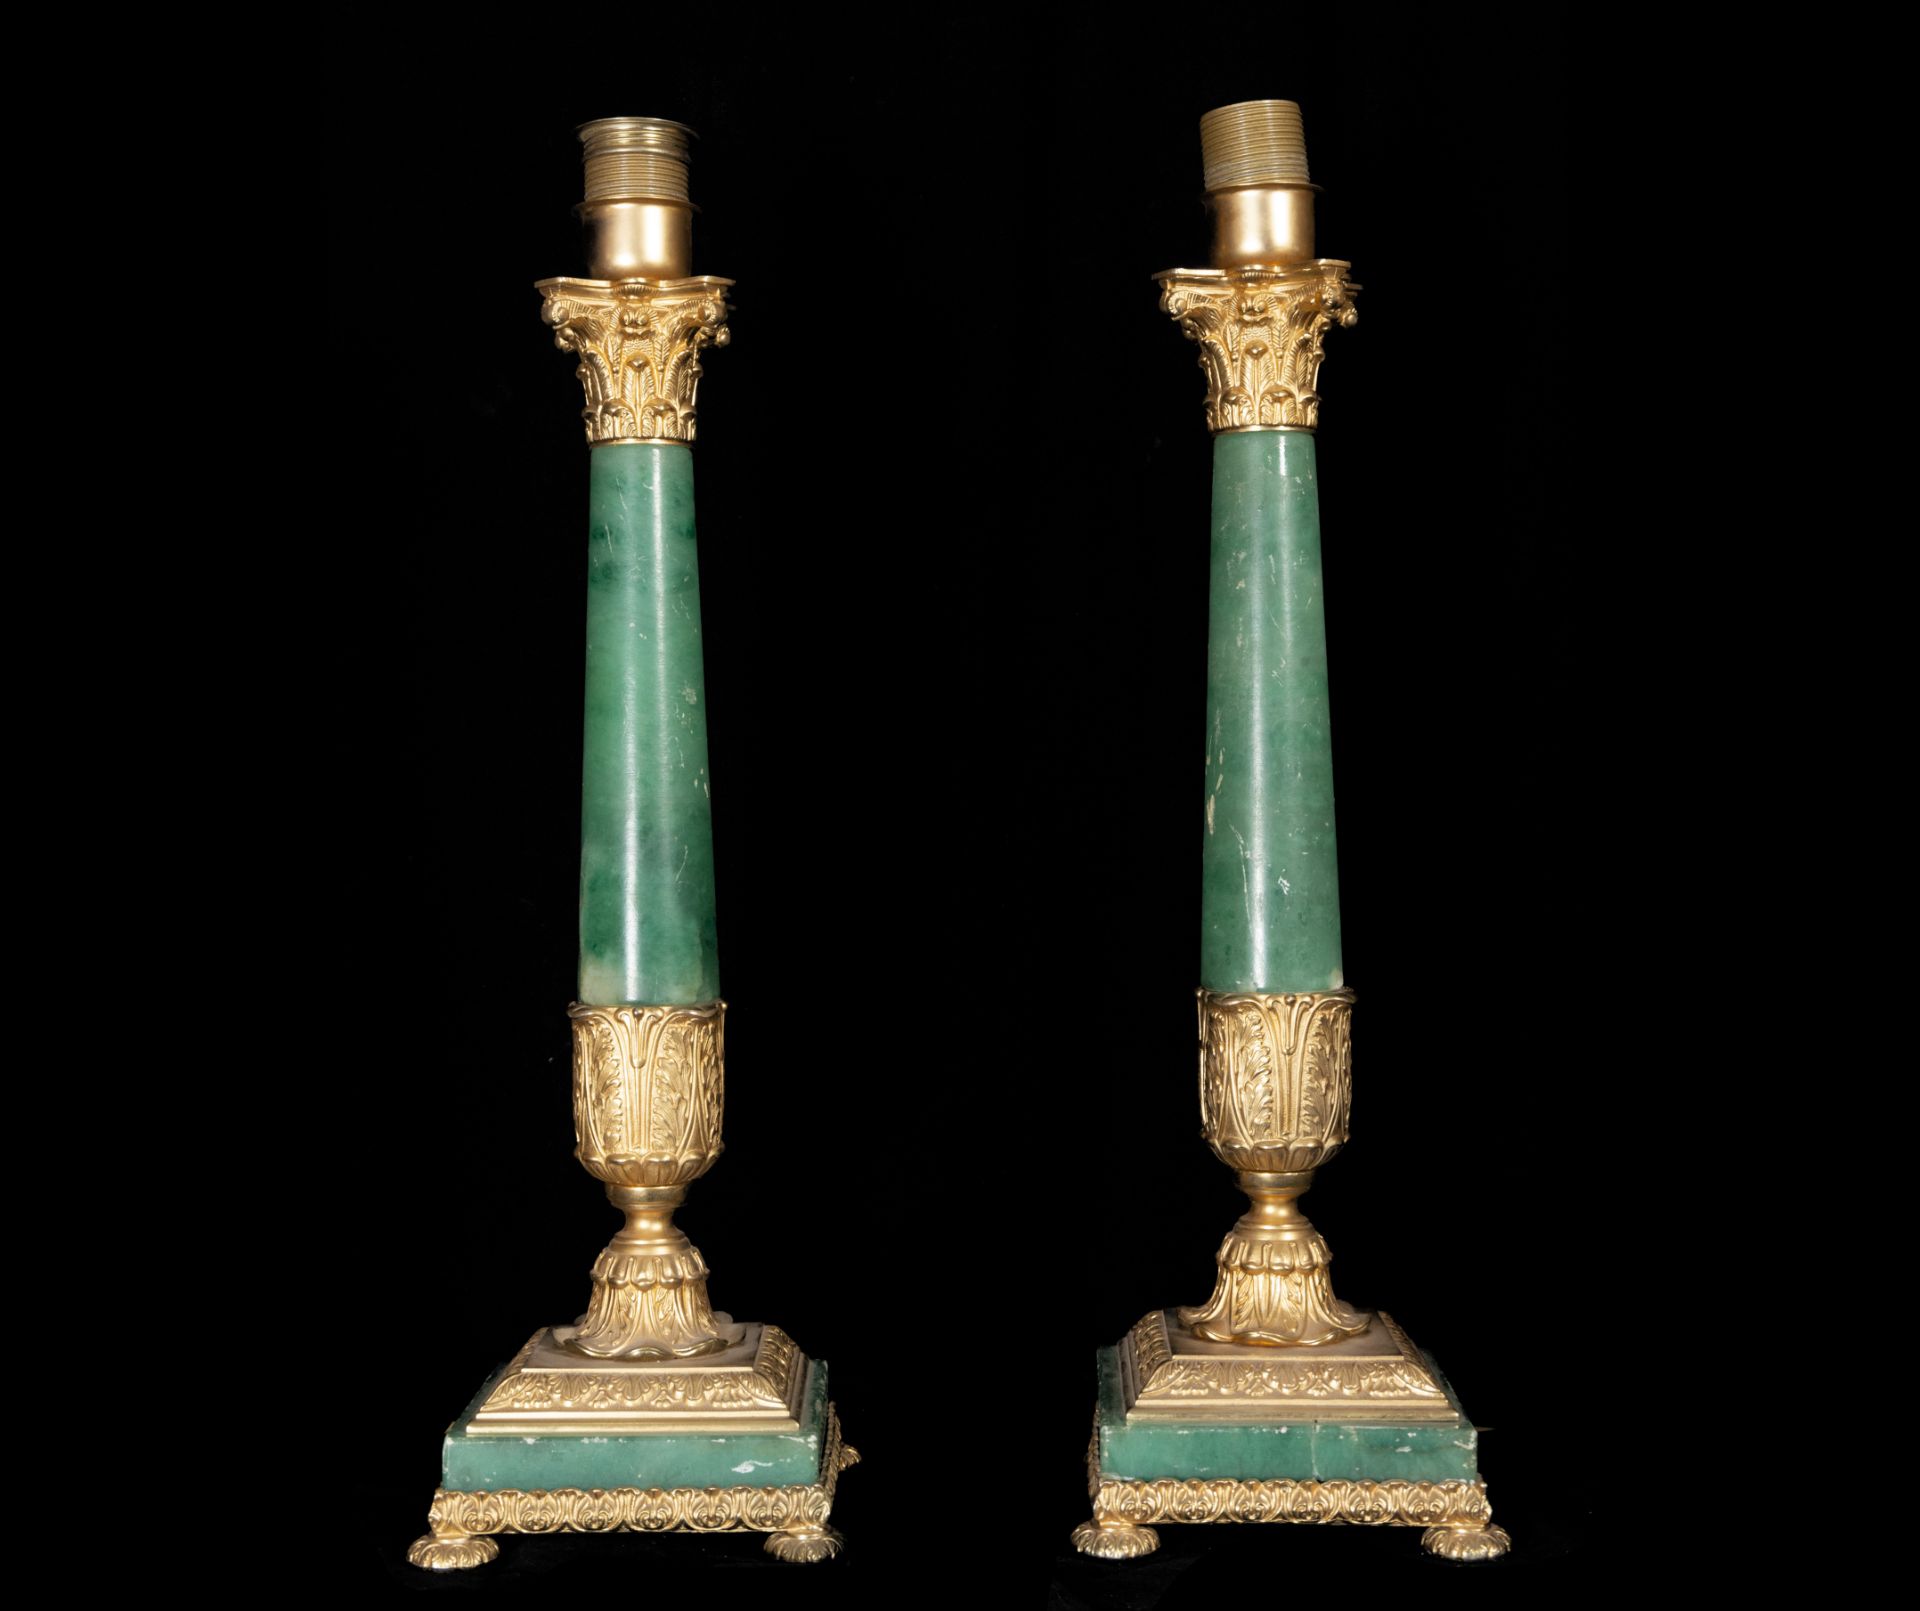 Pair of Empire Lamps in Onyx and mercury-gilded bronze, 19th century